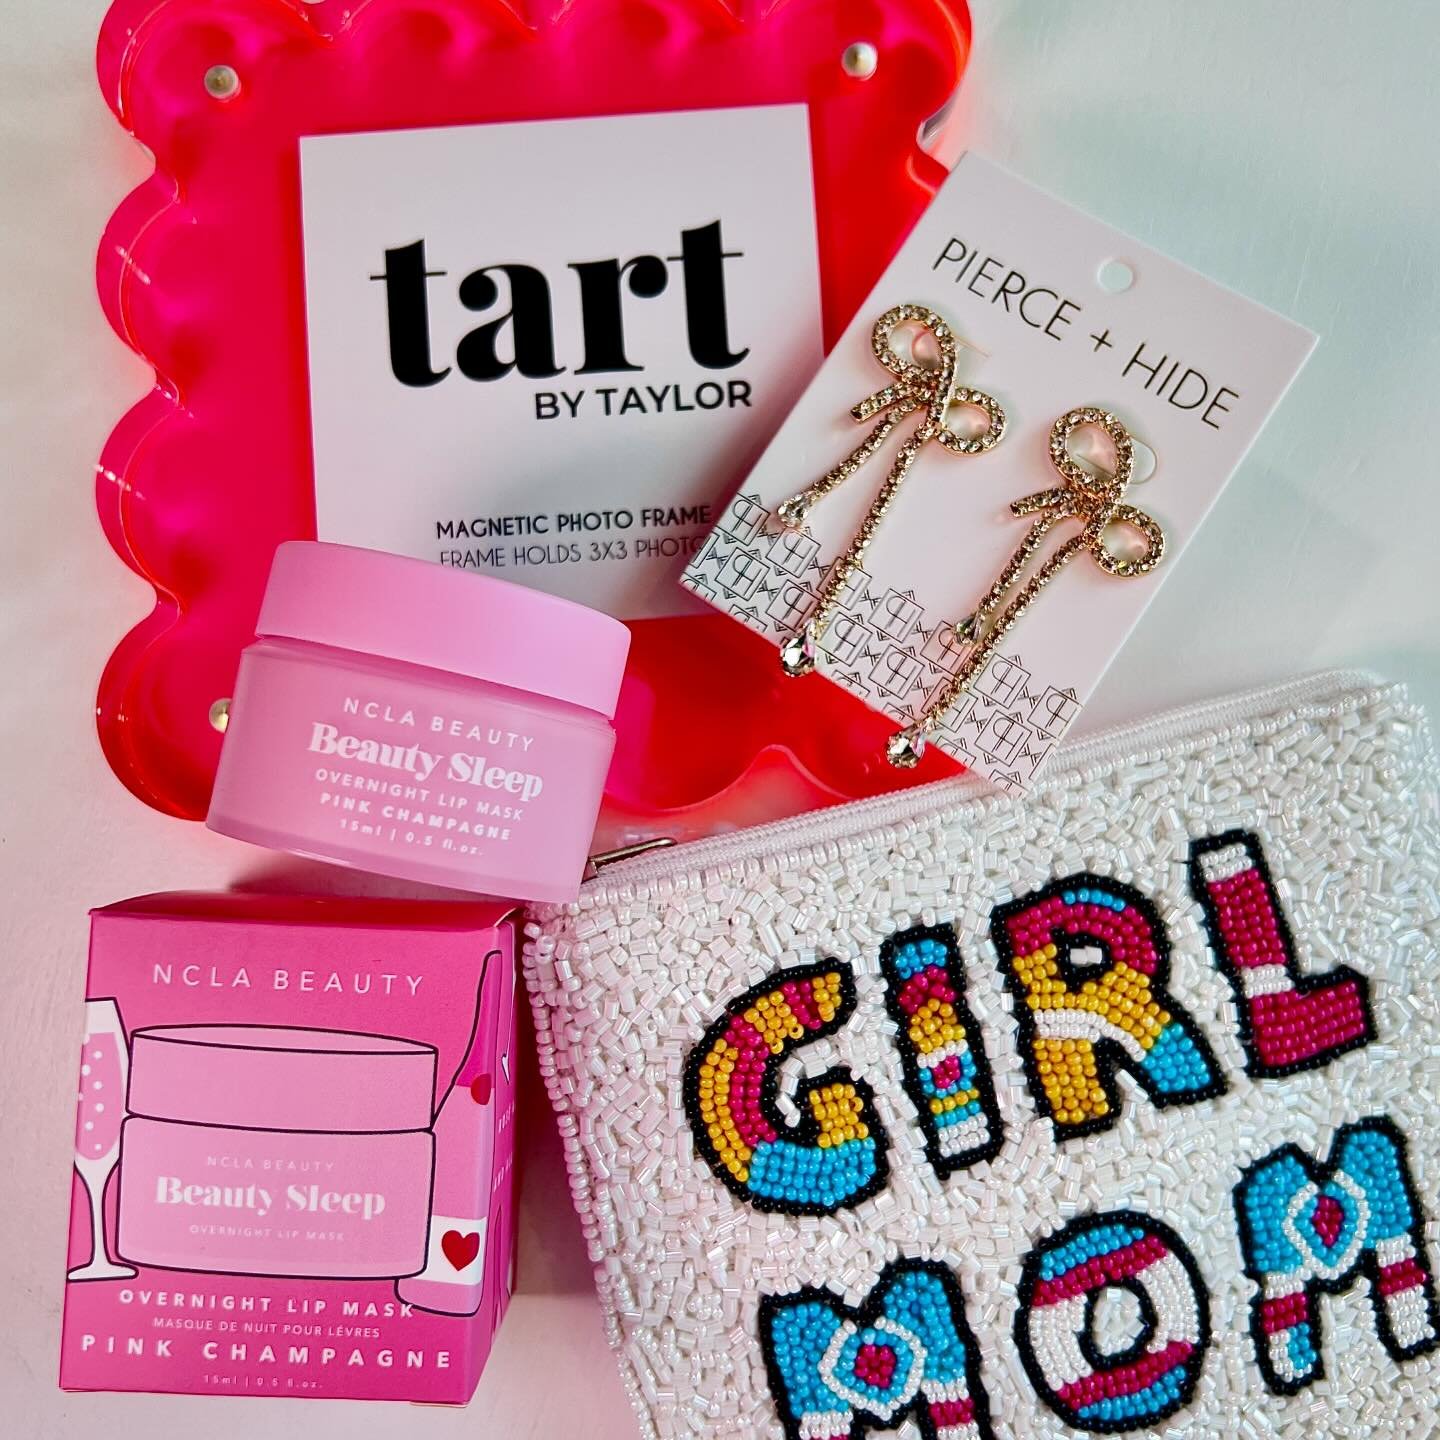 🪩ART WALK DAY!!!🪩
Still looking for a Mother&rsquo;s day gift? We&rsquo;ve got you covered!! Come stop by the gallery until 9 pm tonight during Norman Art Walk to shop our unique gifts and new art!🩷🛍️✨
&bull;
&bull;
&bull;
#mothersday #mothersday